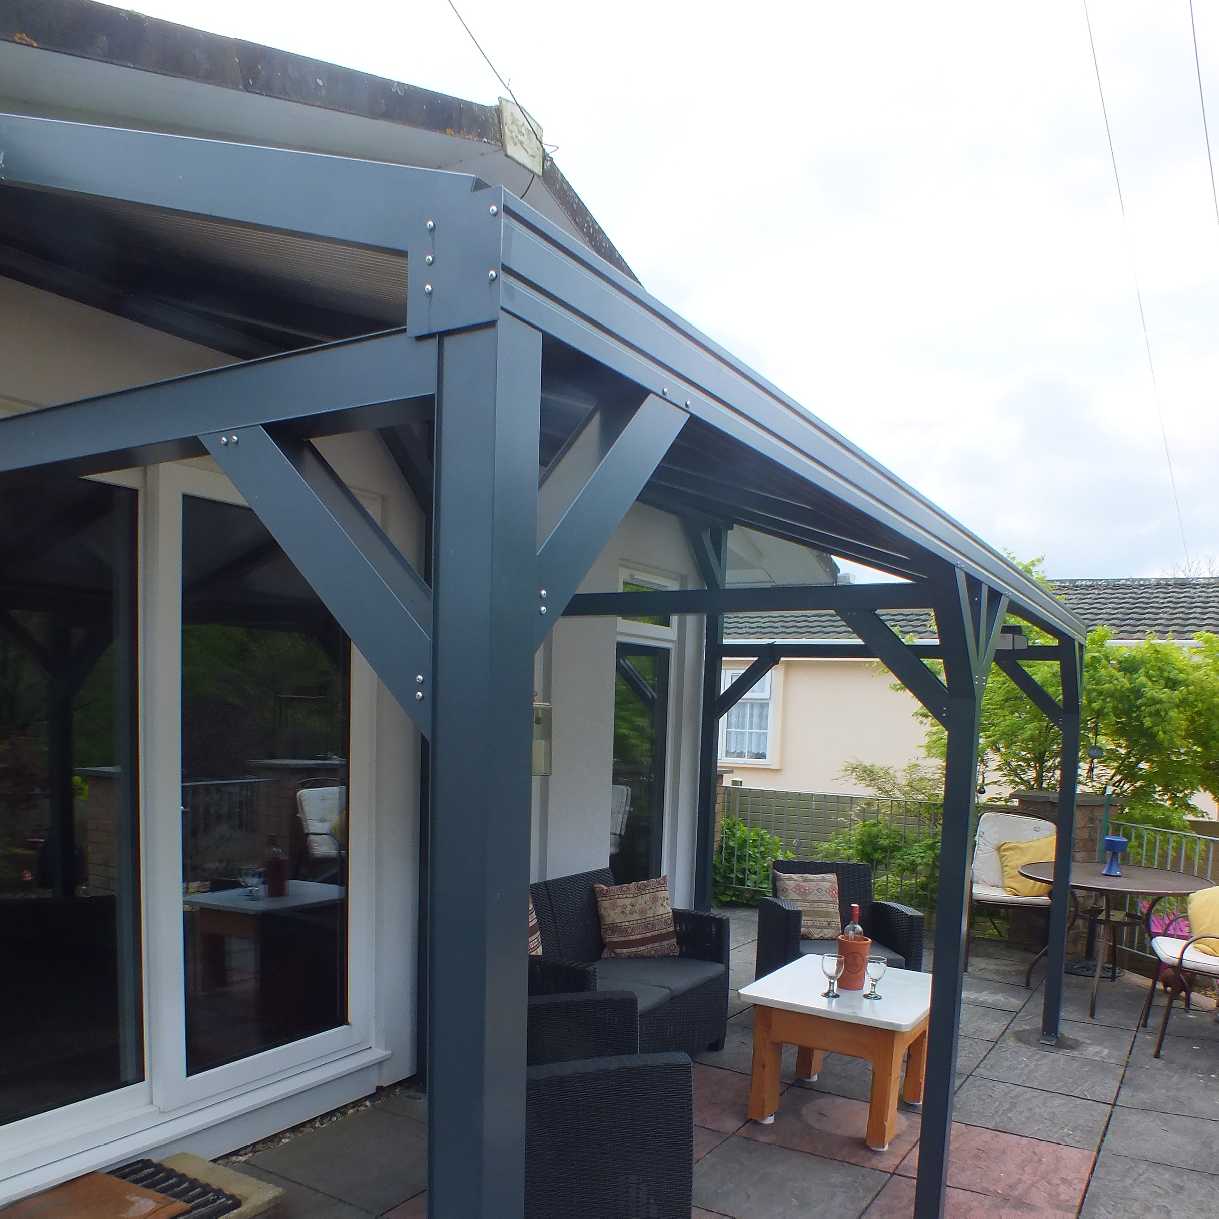 Affordable Omega Smart Free-Standing, Anthracite Grey MonoPitch Roof Canopy with 16mm Polycarbonate Glazing - 6.3m (W) x 2.5m (P), (8) Supporting Posts